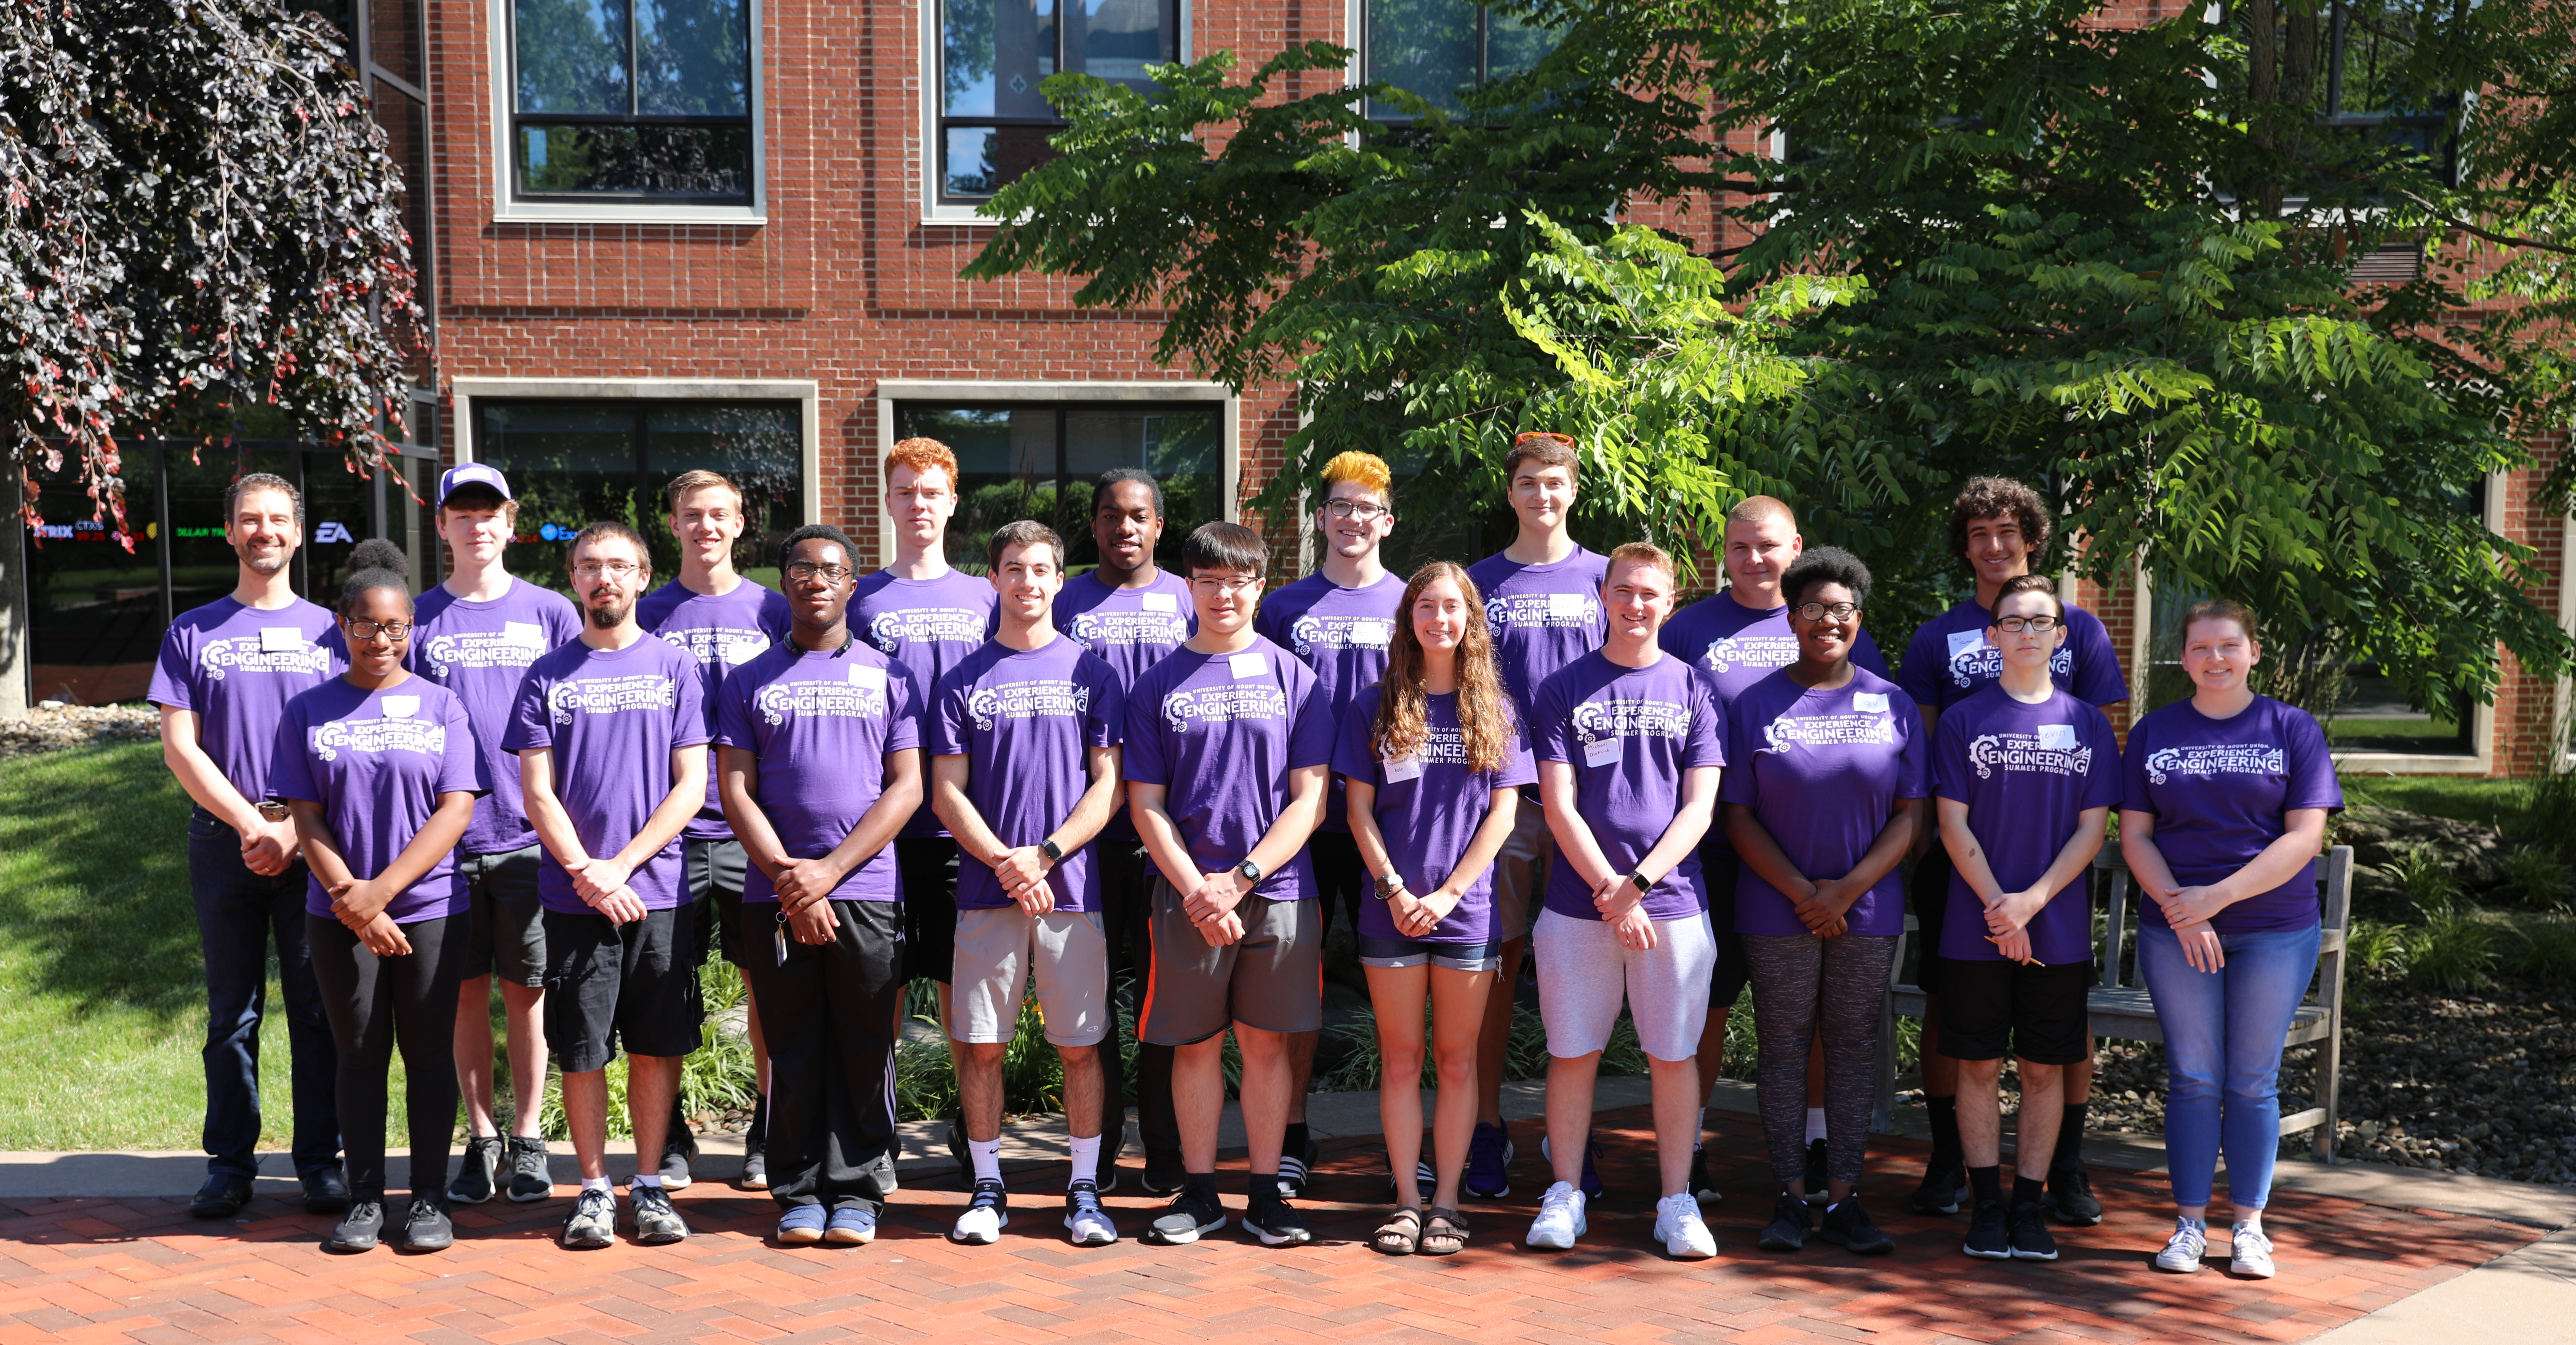 Second Annual Experience Engineering Program at the University of Mount Union